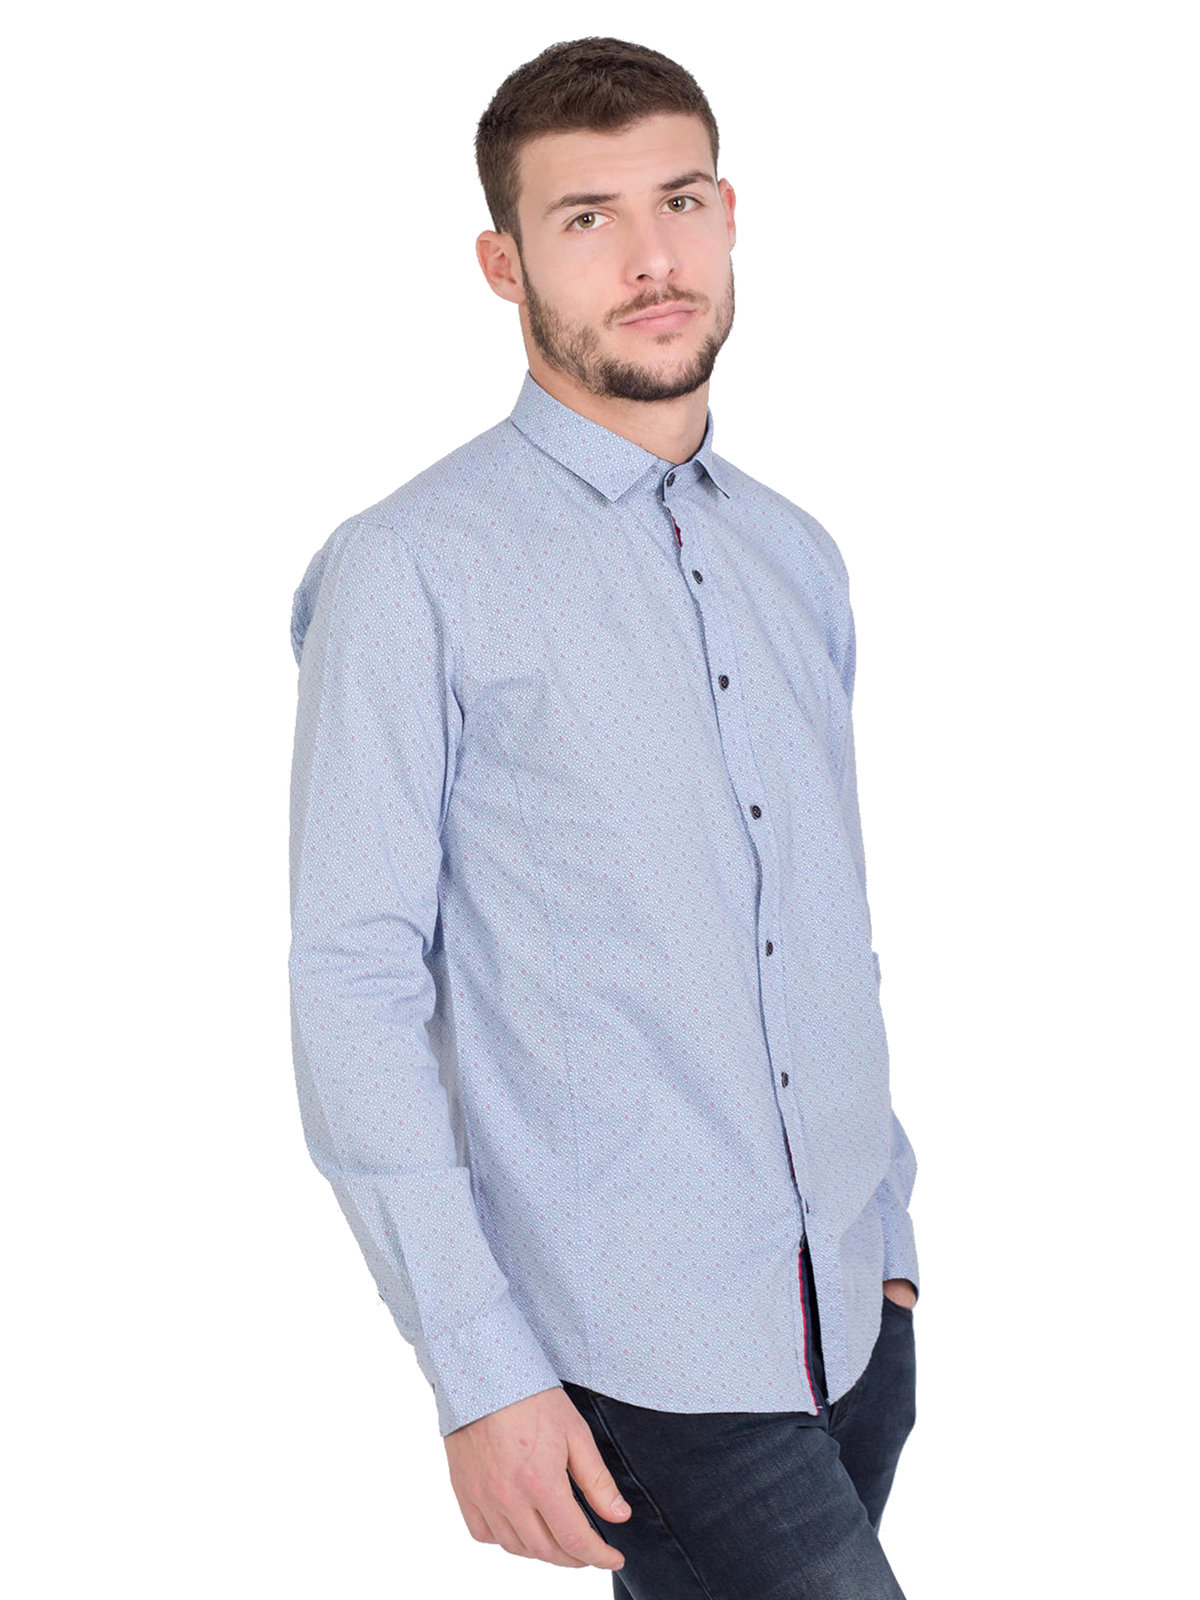 Shirt in blue with small red figures - 21440 € 21.93 img4